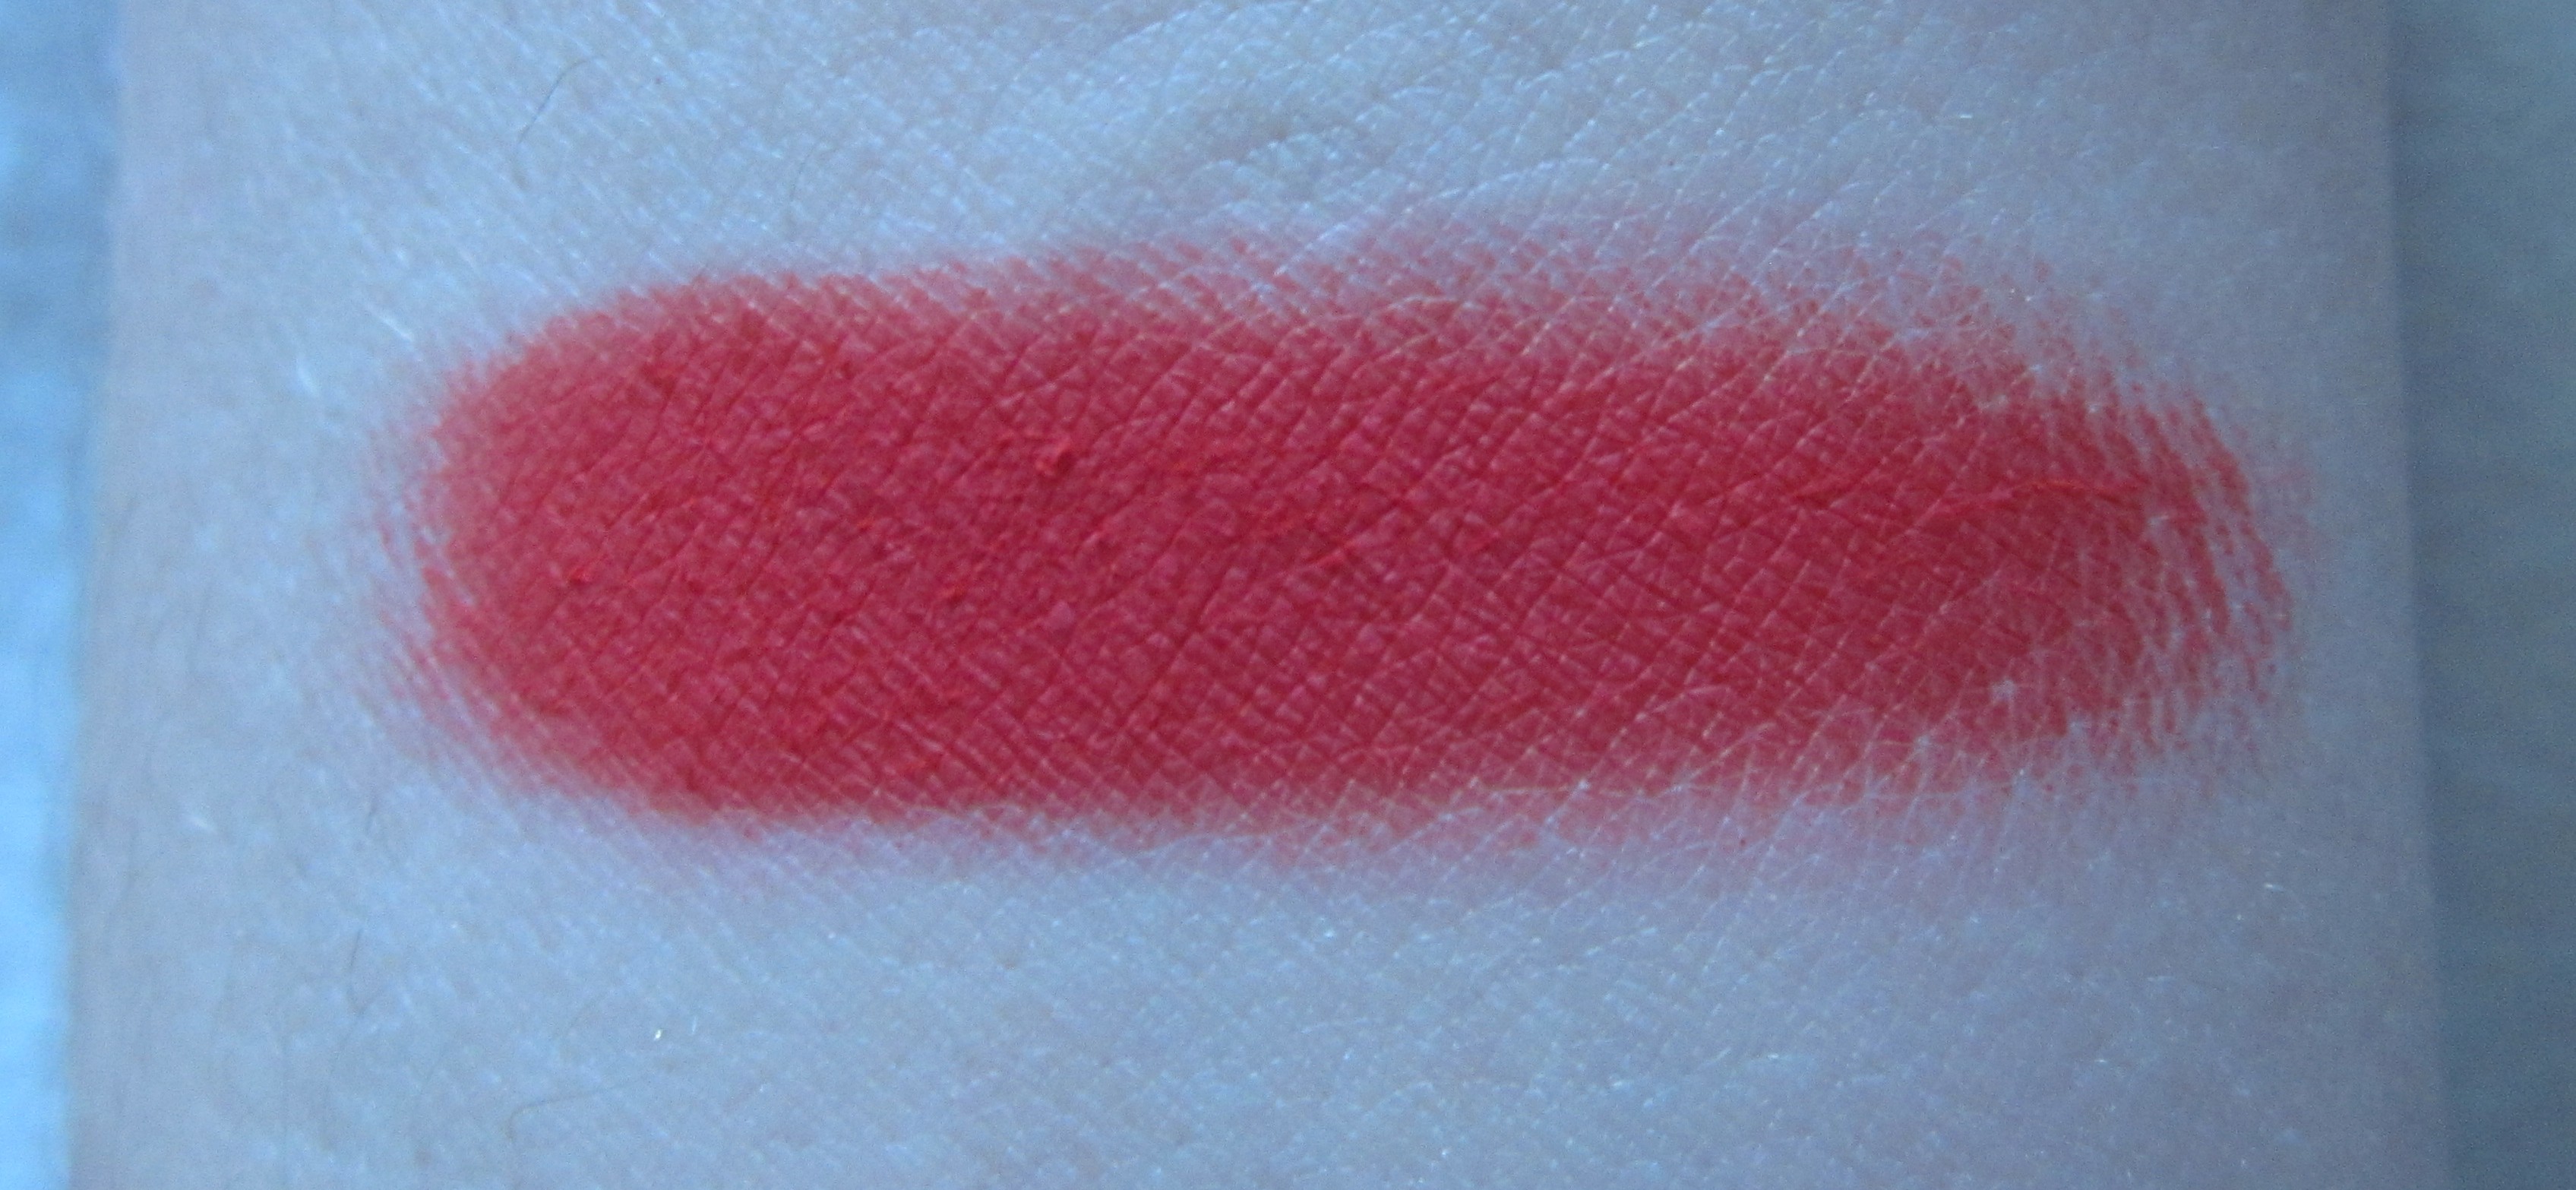 NARS Exhibit A Blush – Swatches and Review